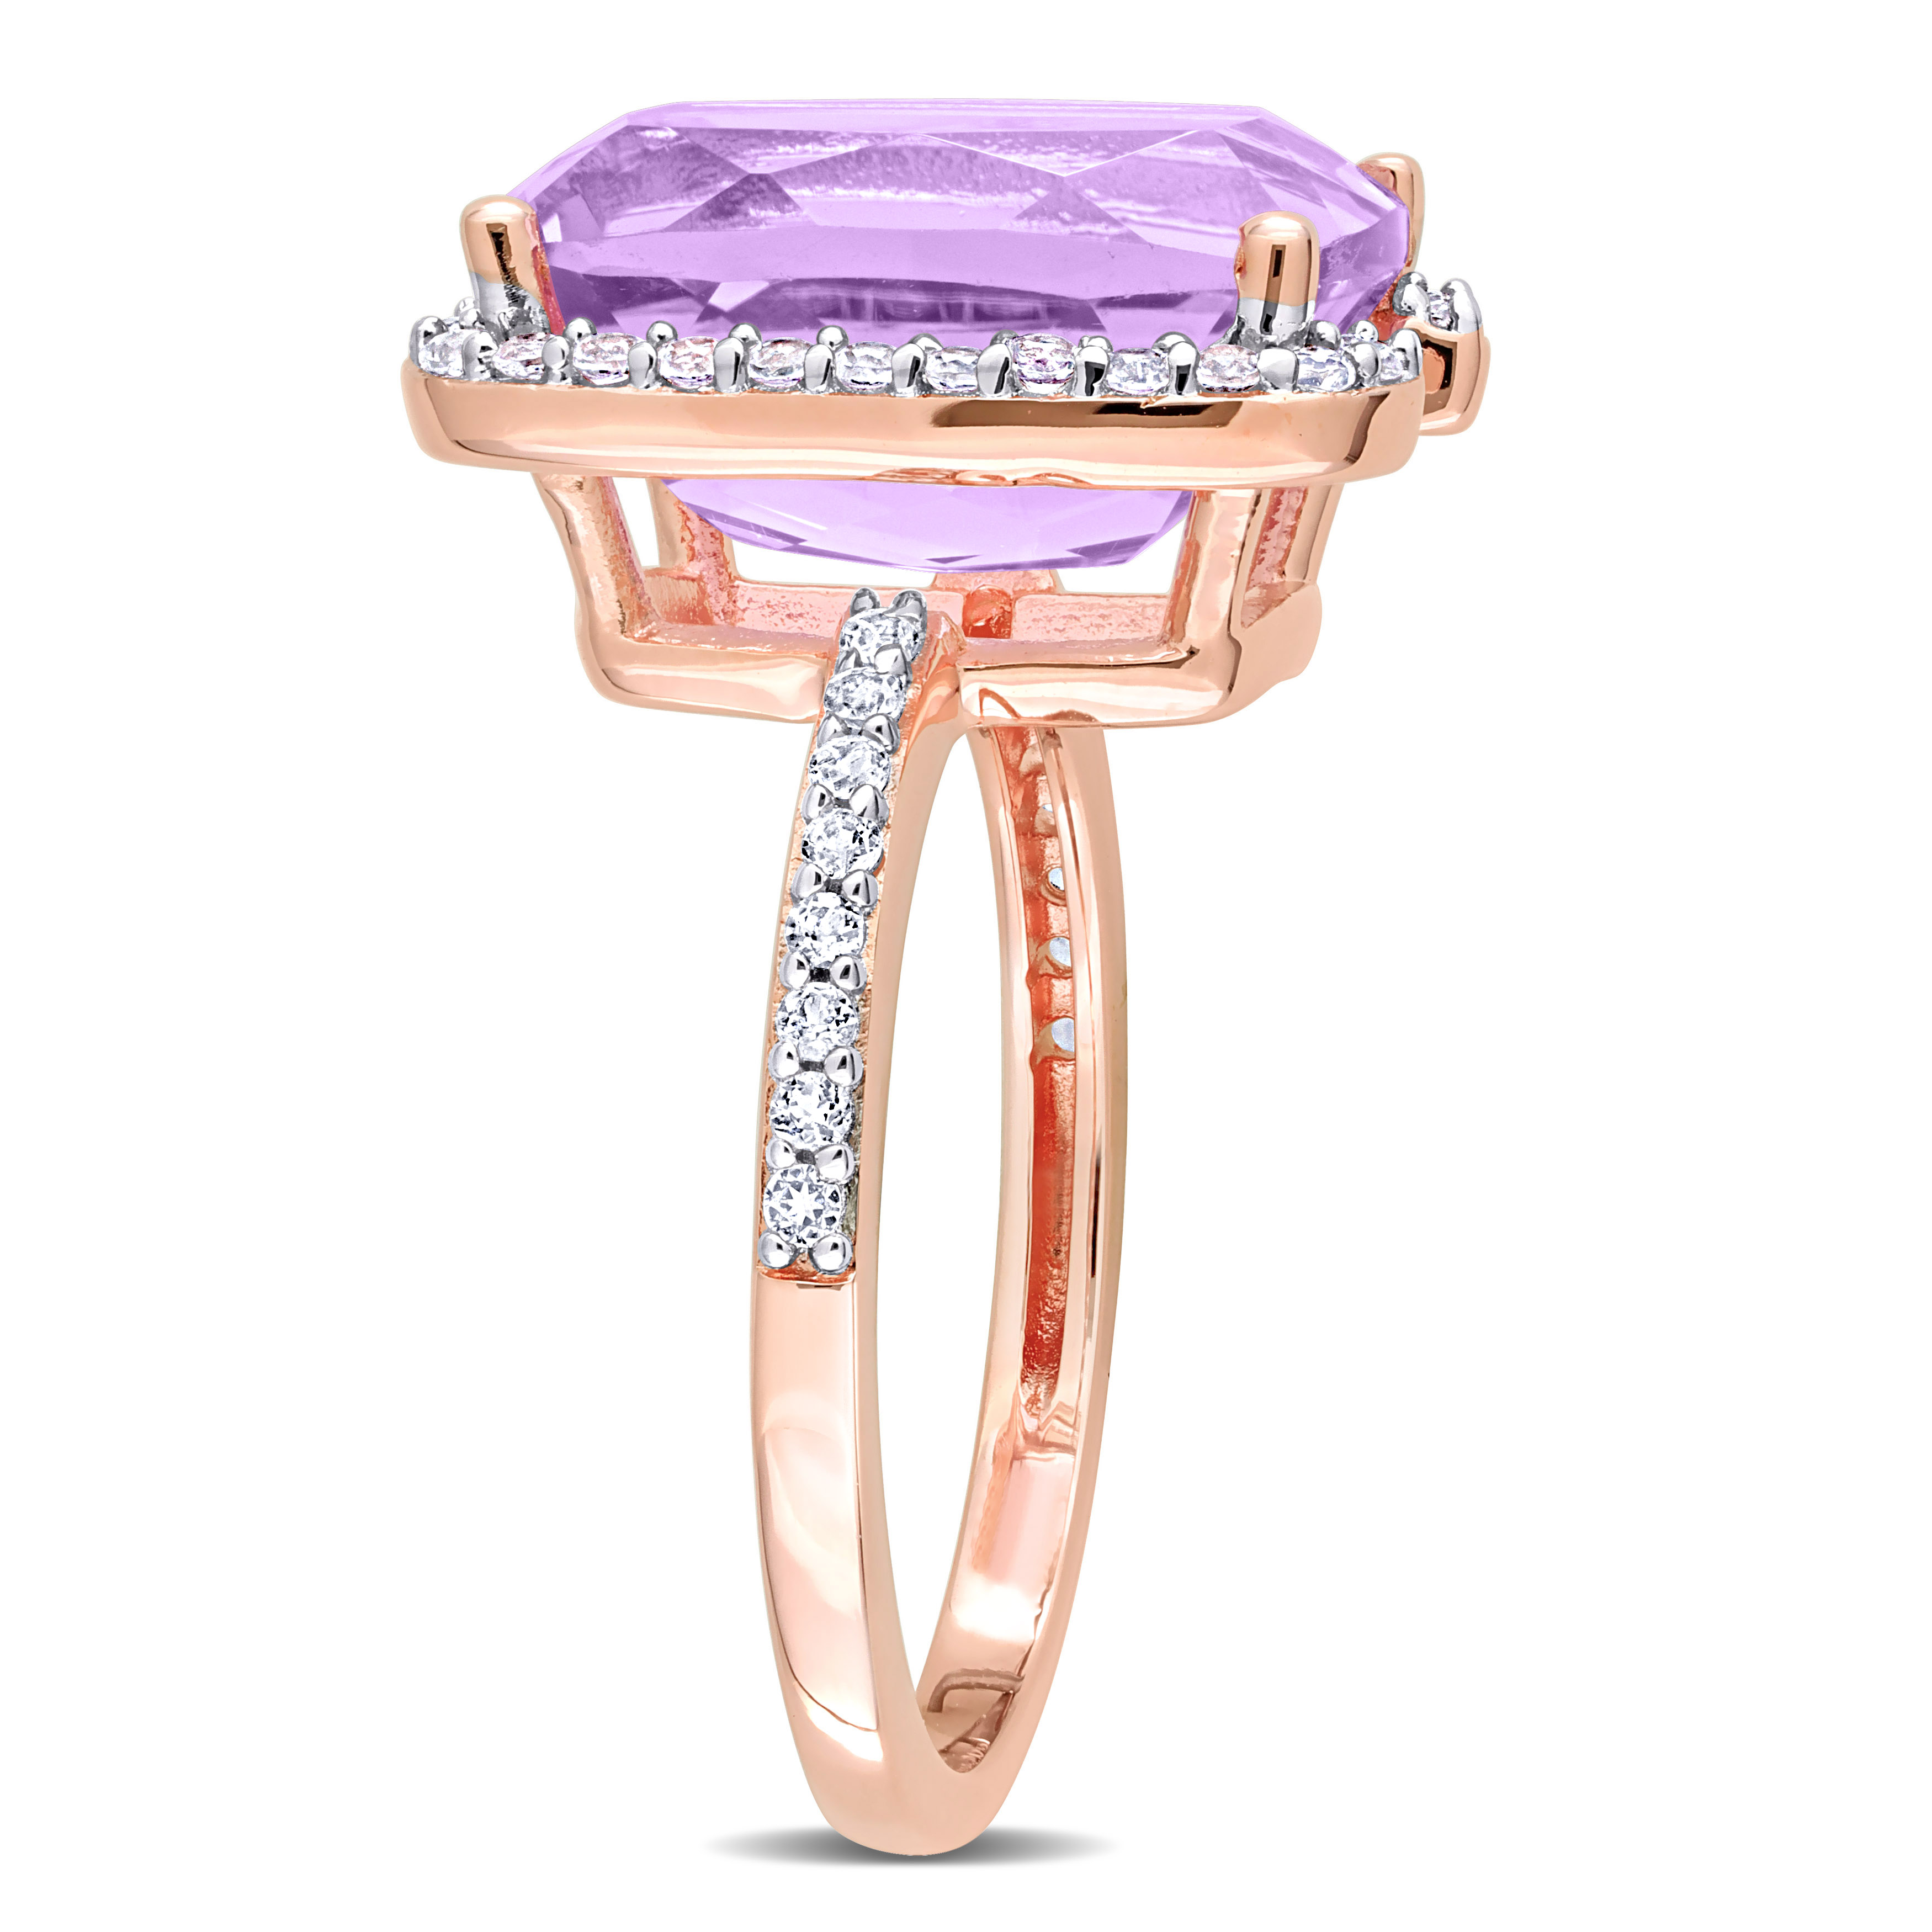 7 7/8 CT TGW Cushion-cut Rose de France and White Topaz Bracket Cocktail Ring in Rose Plated Sterling Silver